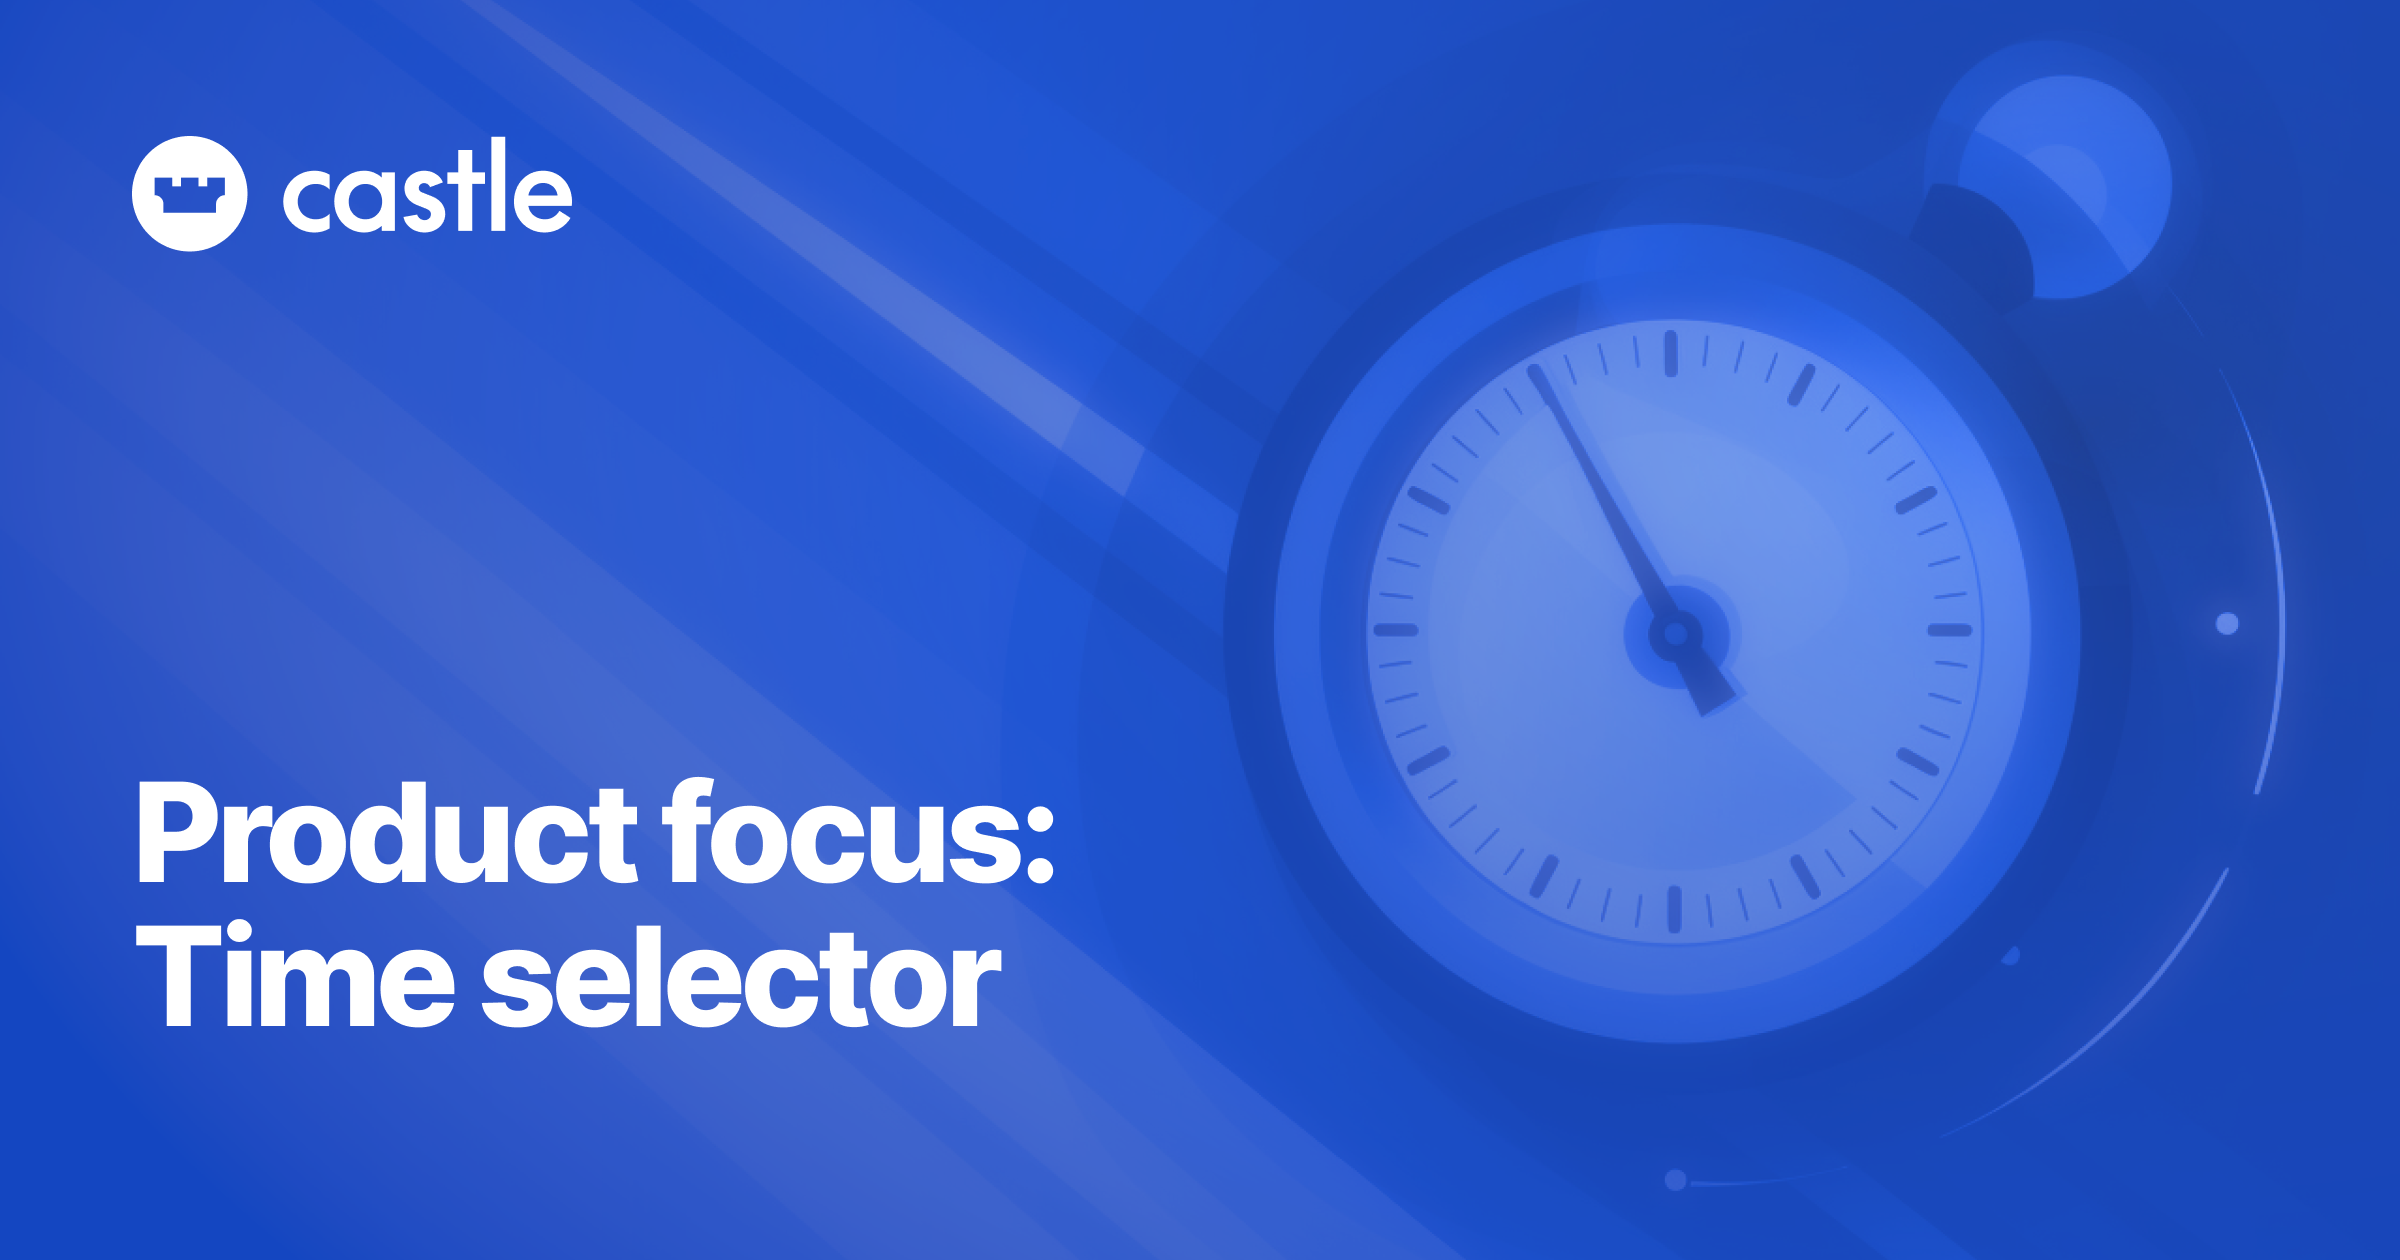 Product focus: Time selector